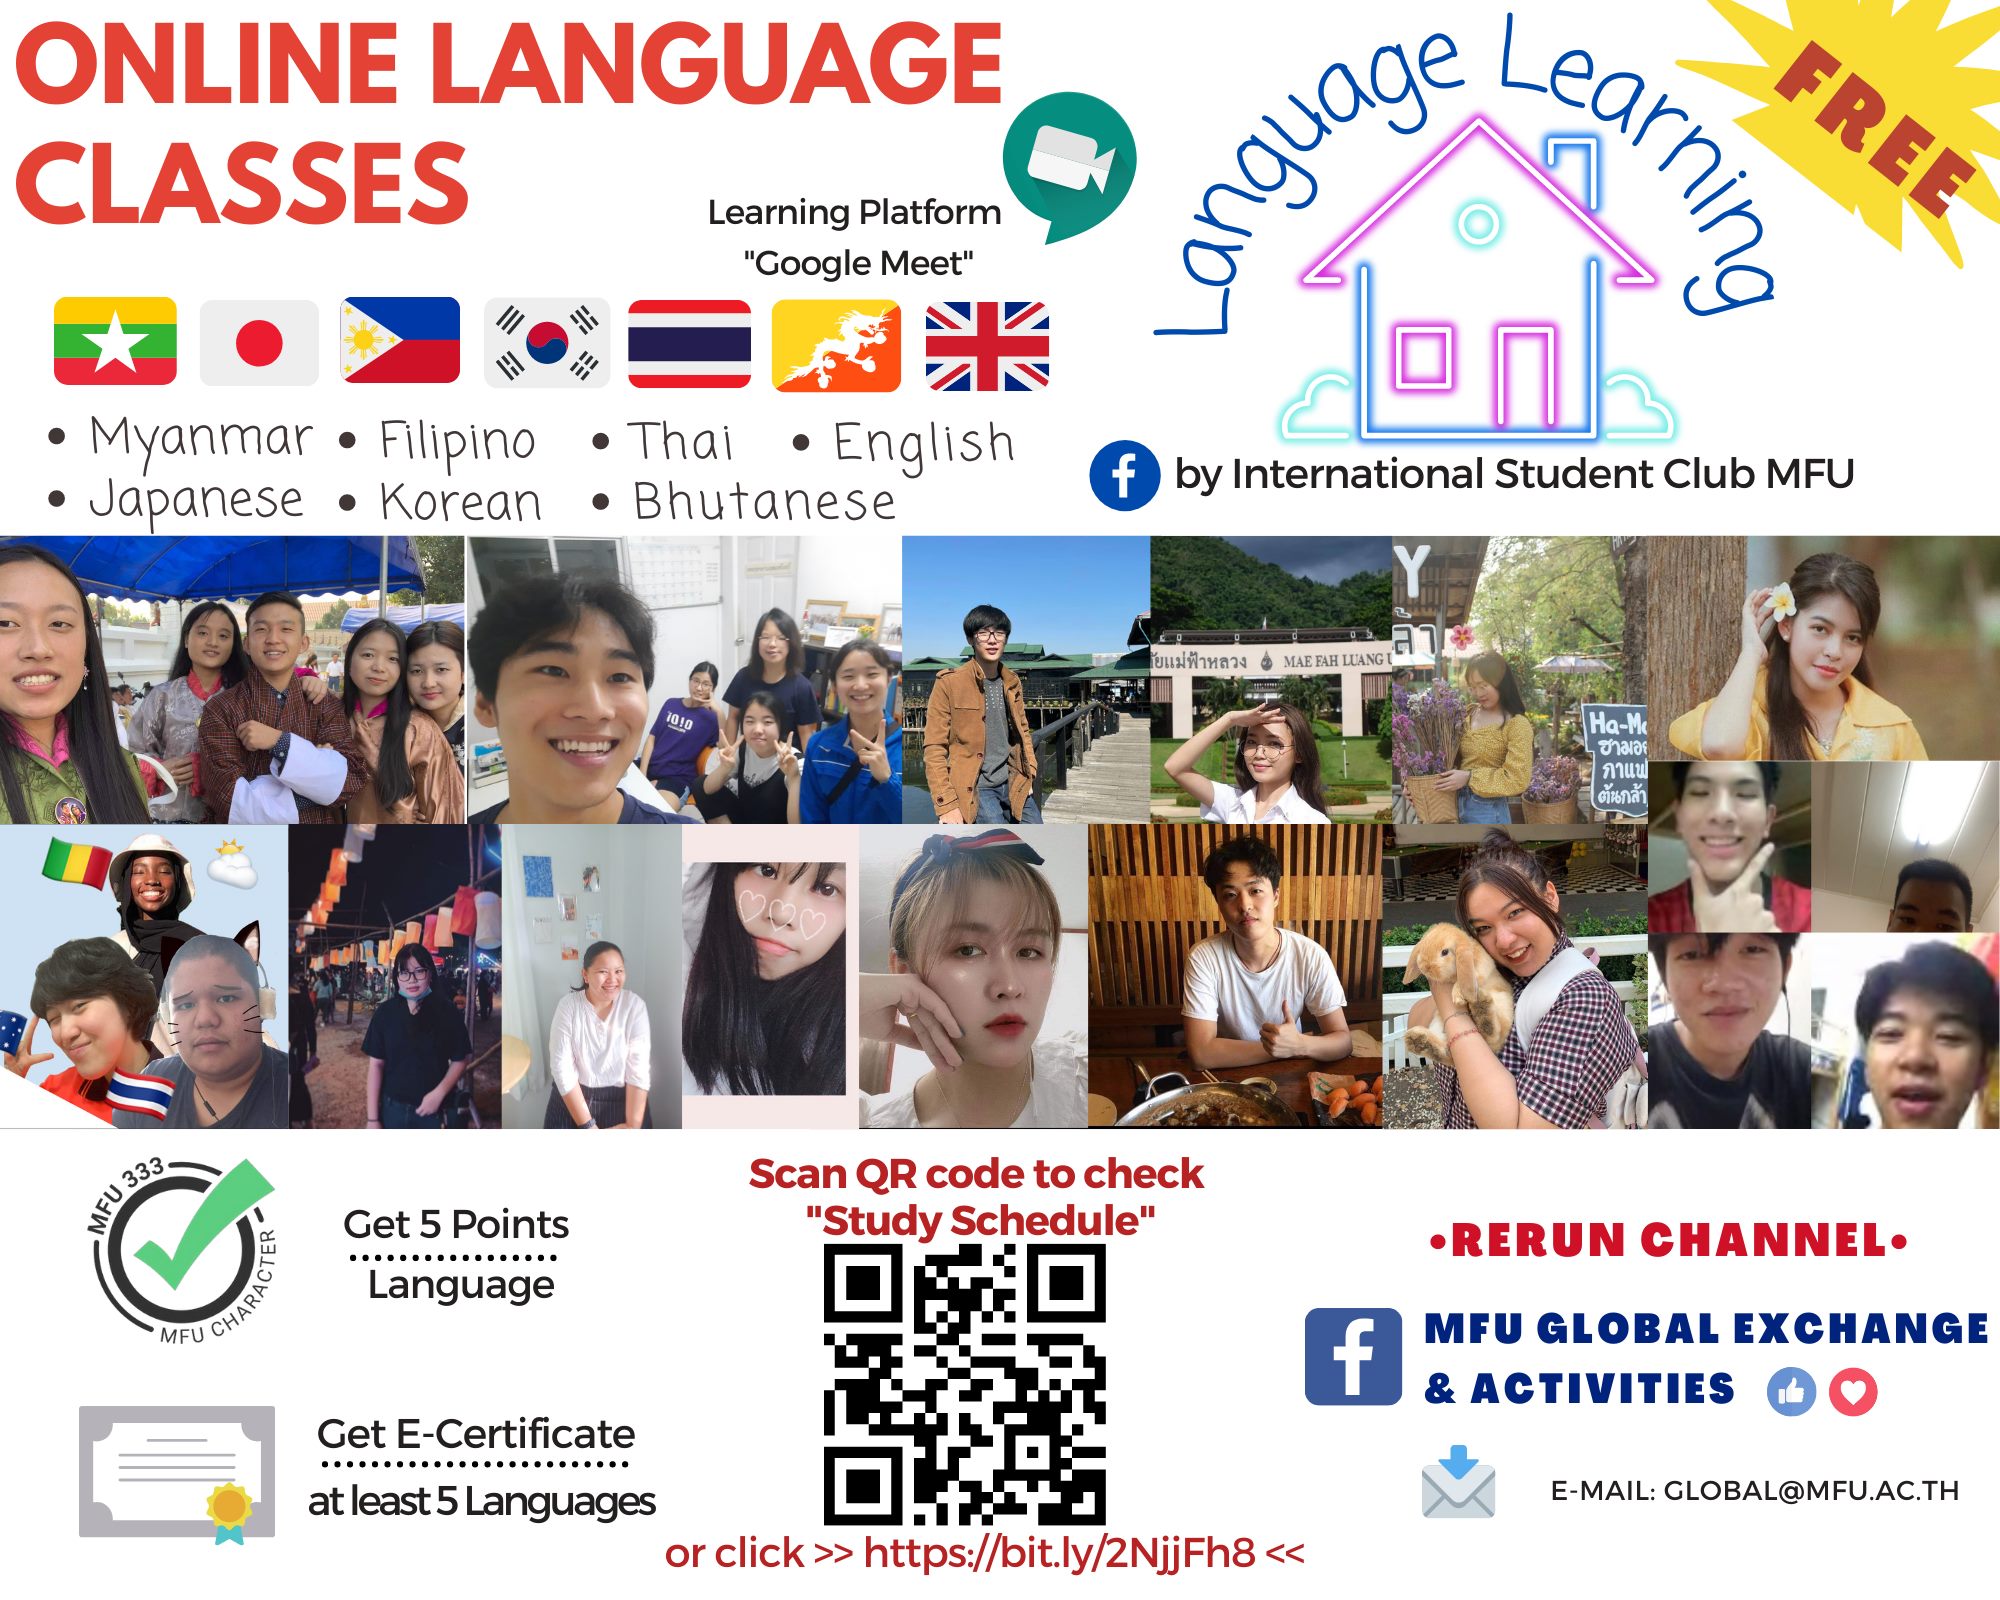 Sign up for Japanese, Korean, Thai, and Bhutanese Language Lessons!